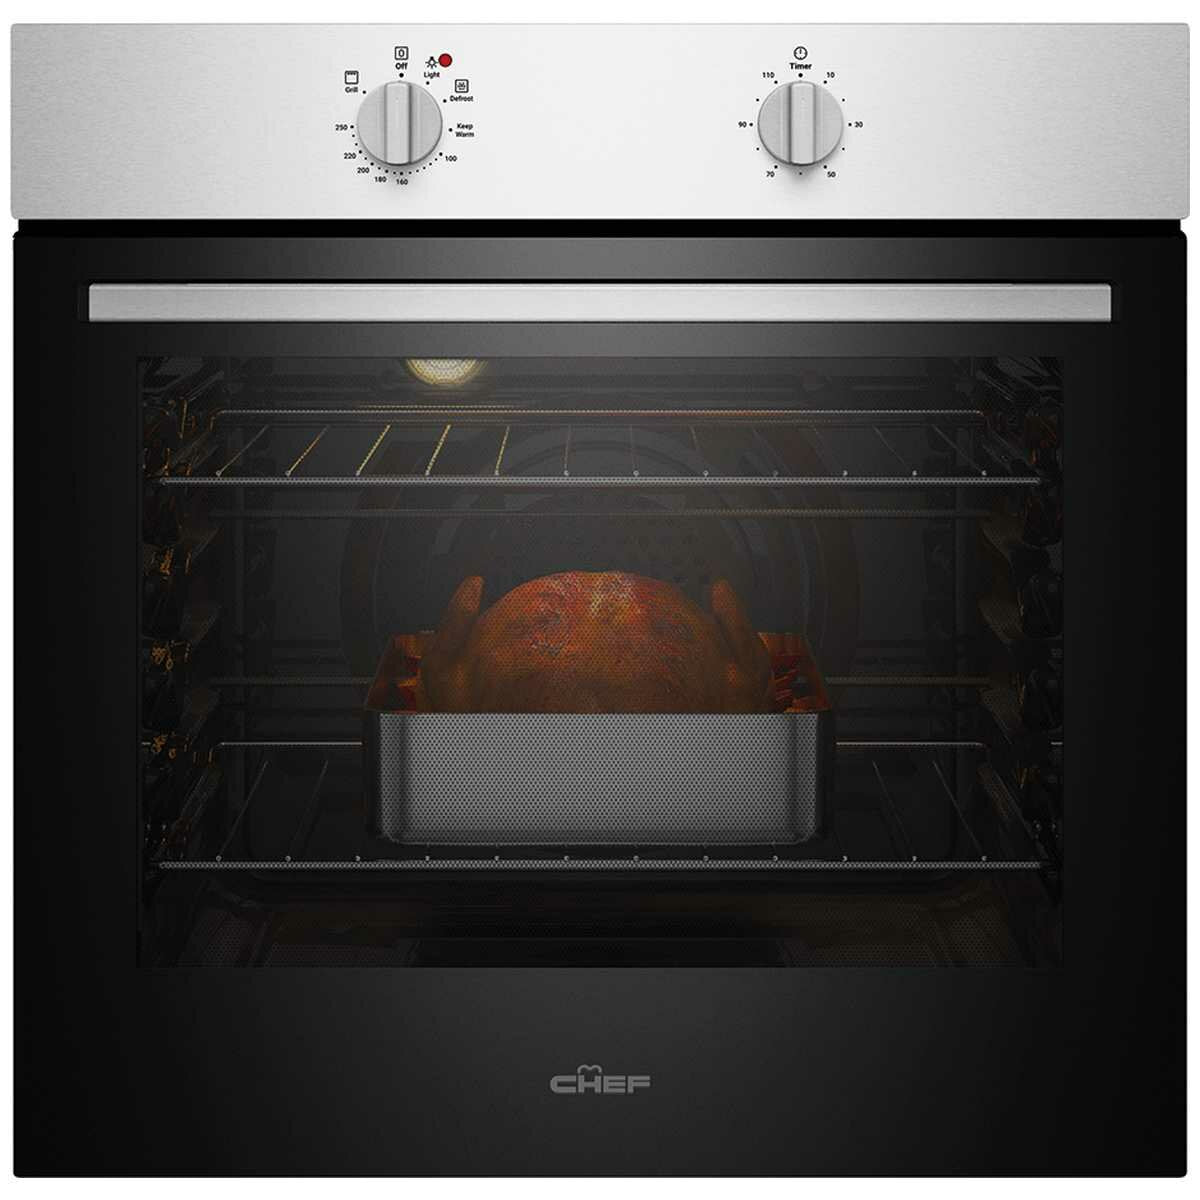 Chef 60cm Electric Built-In Oven - Brisbane Home Appliances